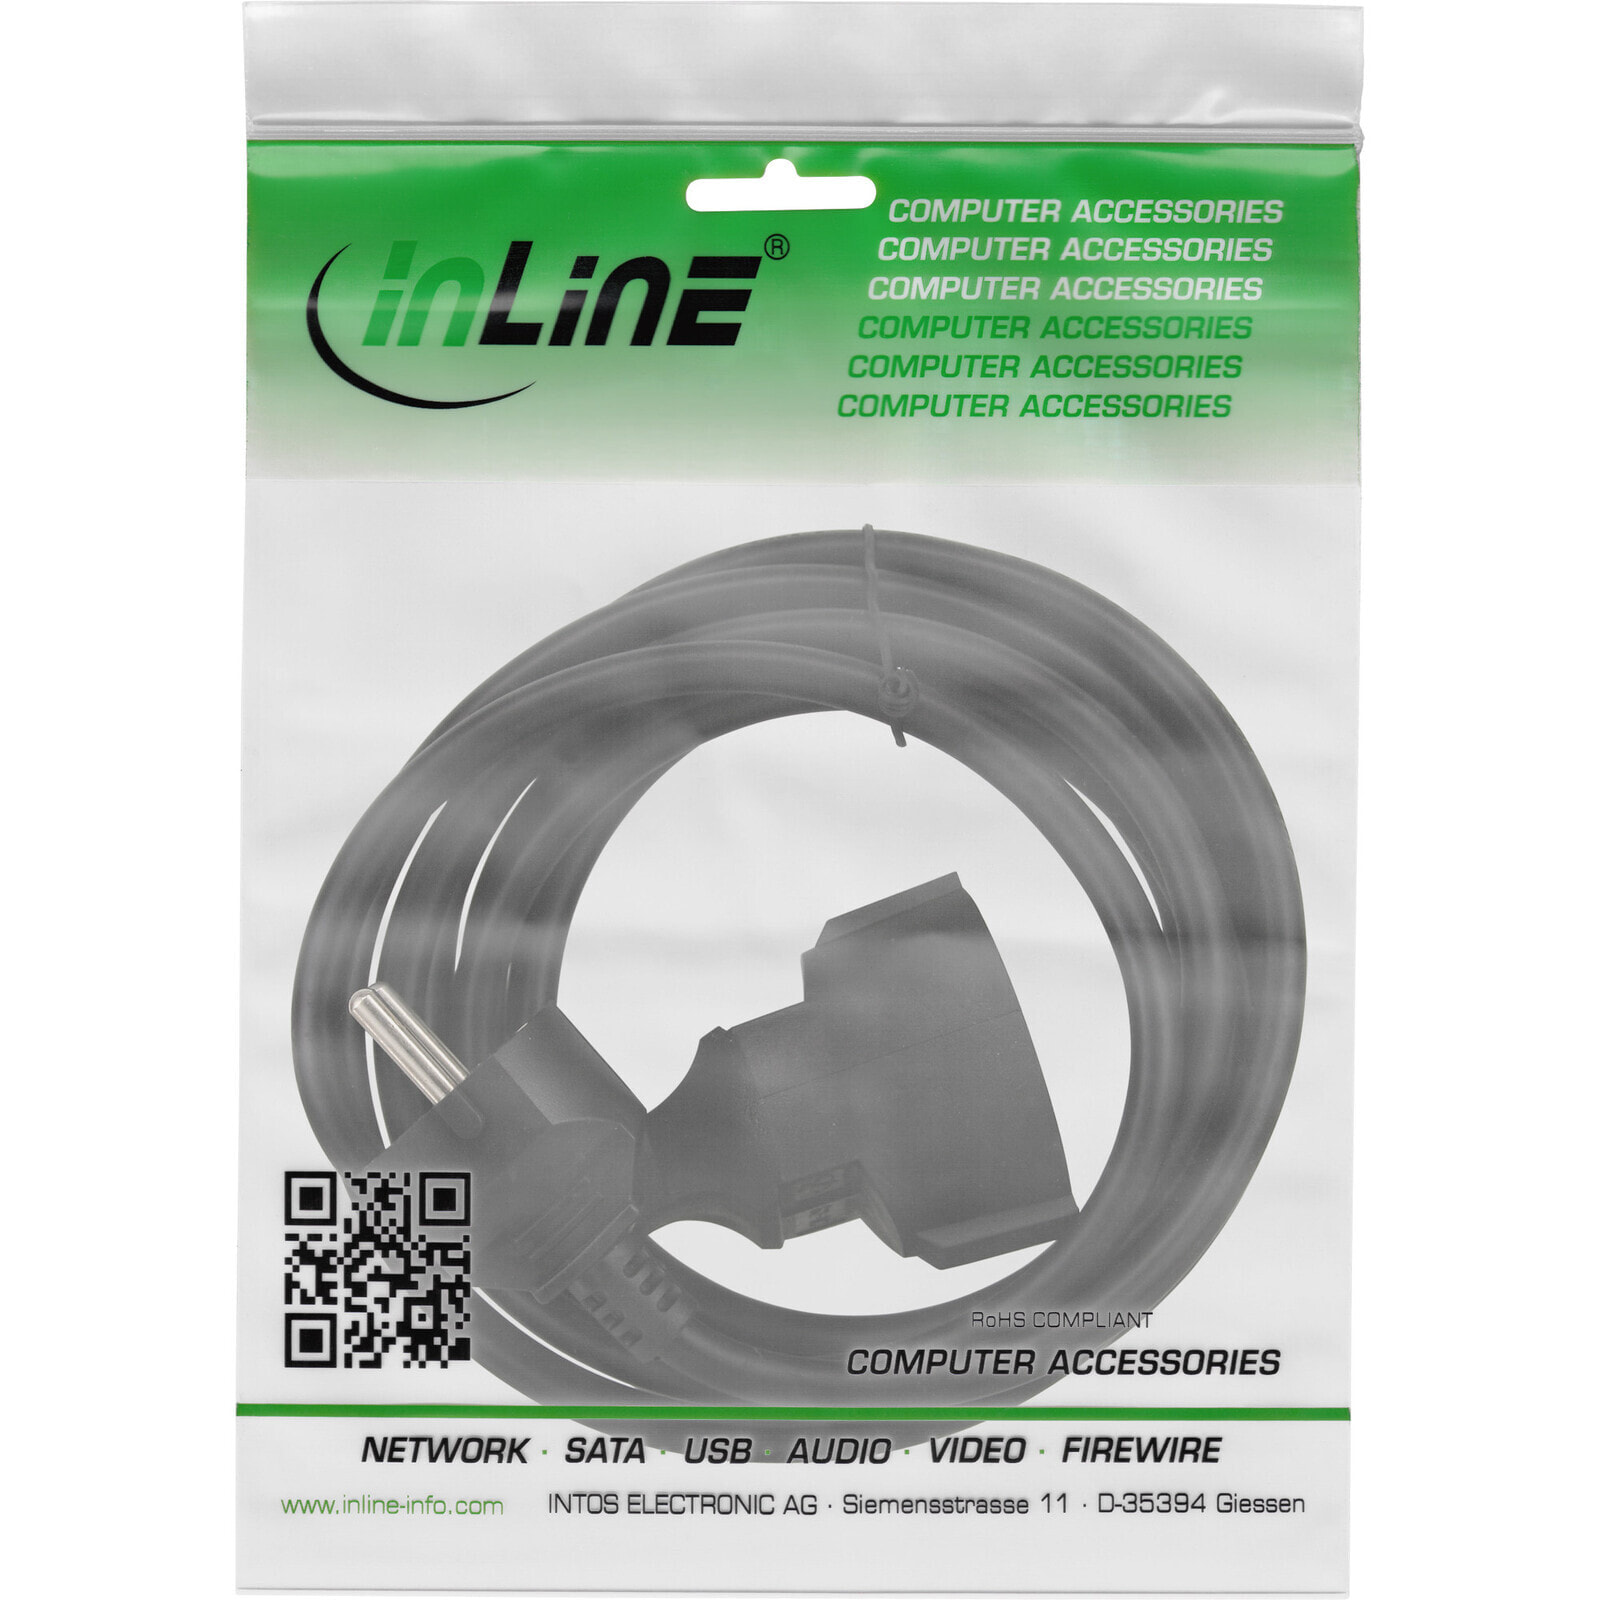 InLine Power extension cable - black - 1.5m - 1.5 m - CEE7/7 - CEE7/7 - H05VV-F3G - 230 V